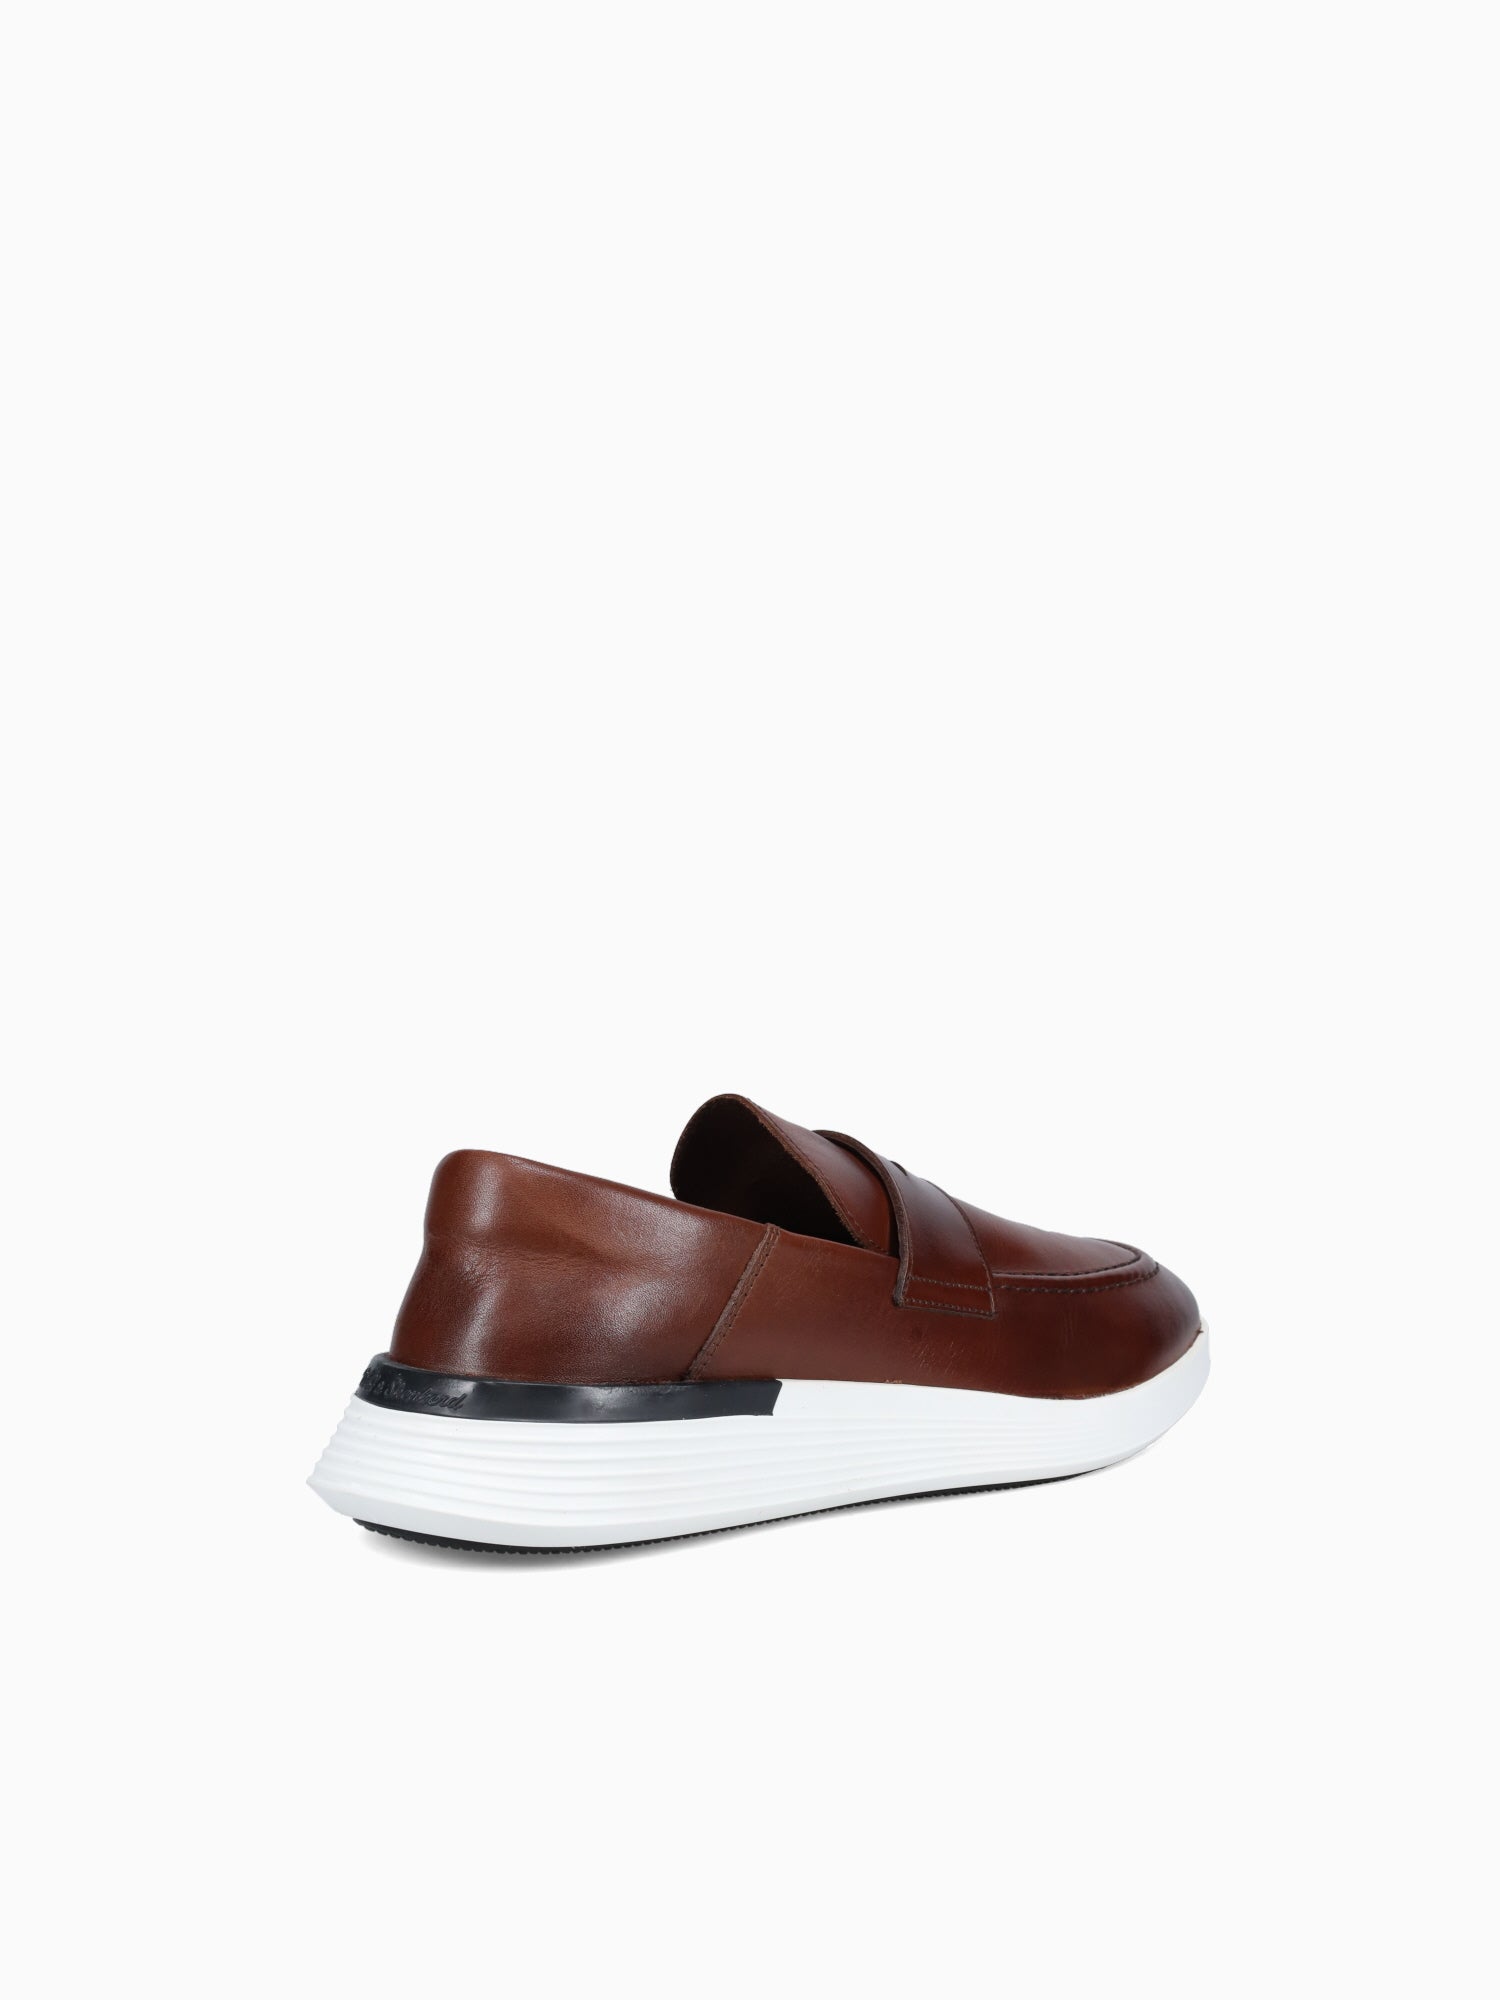 Crossover Loafer Maple White calfskin Brown / 7 / M